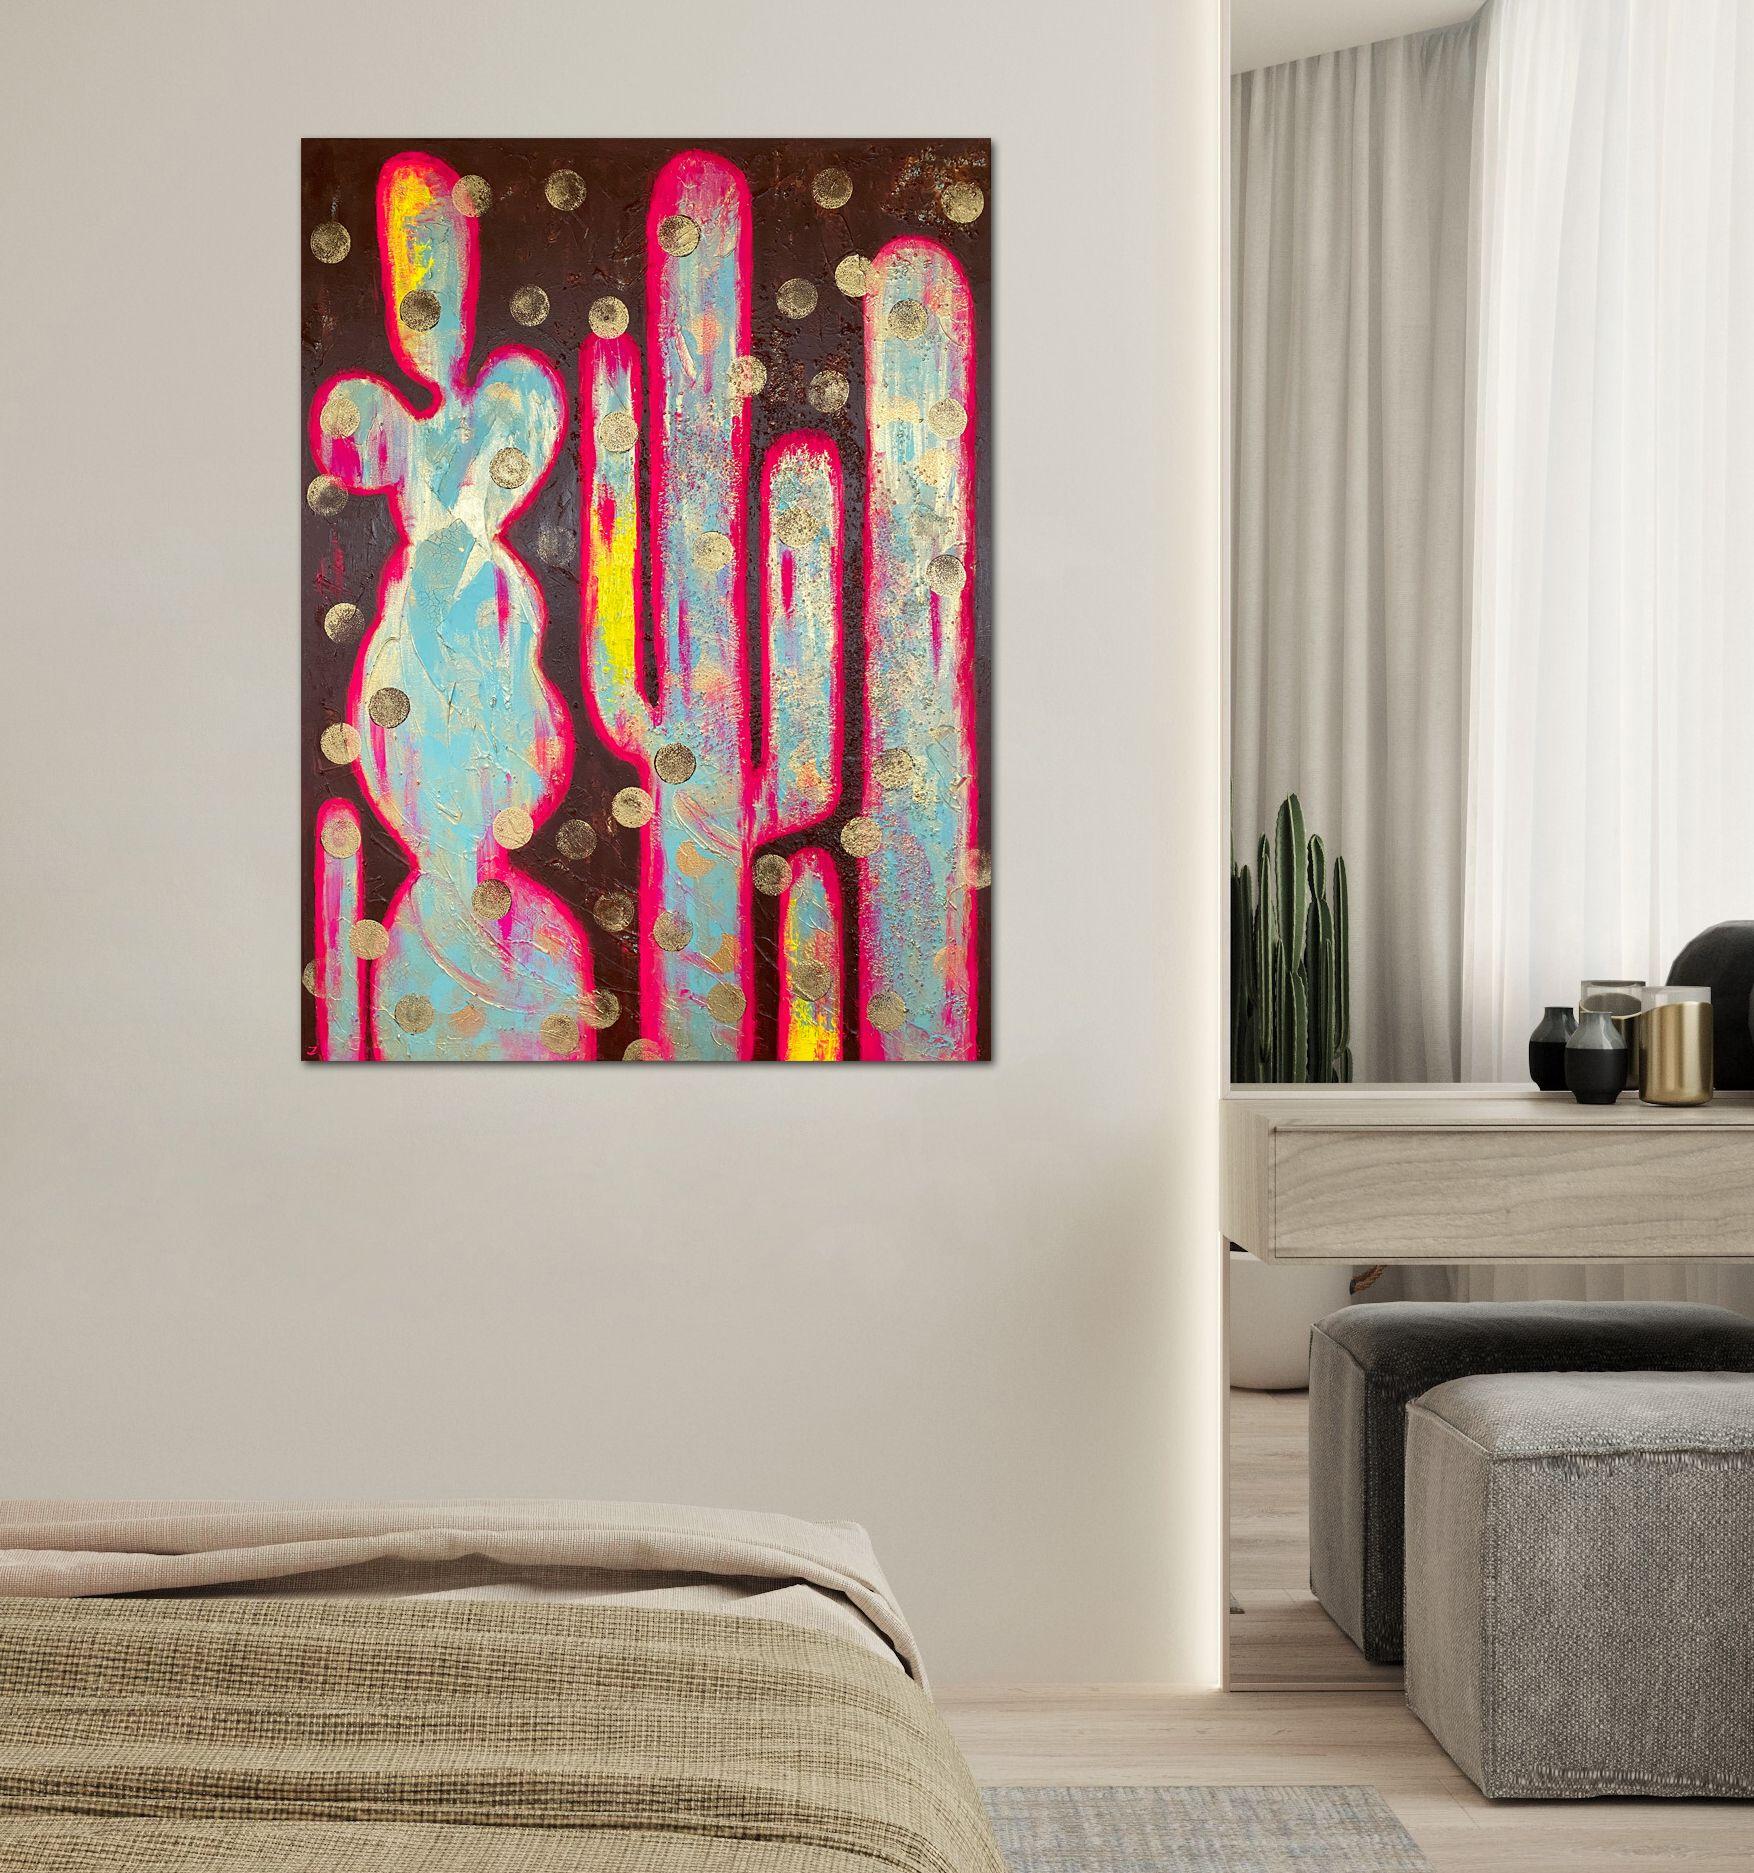 Colorful cactuses. Rich texture. Bold brushstrokes. Original acrylic painting on stretched canvas. Gallery profile. Size 40 x 30 x 1.5